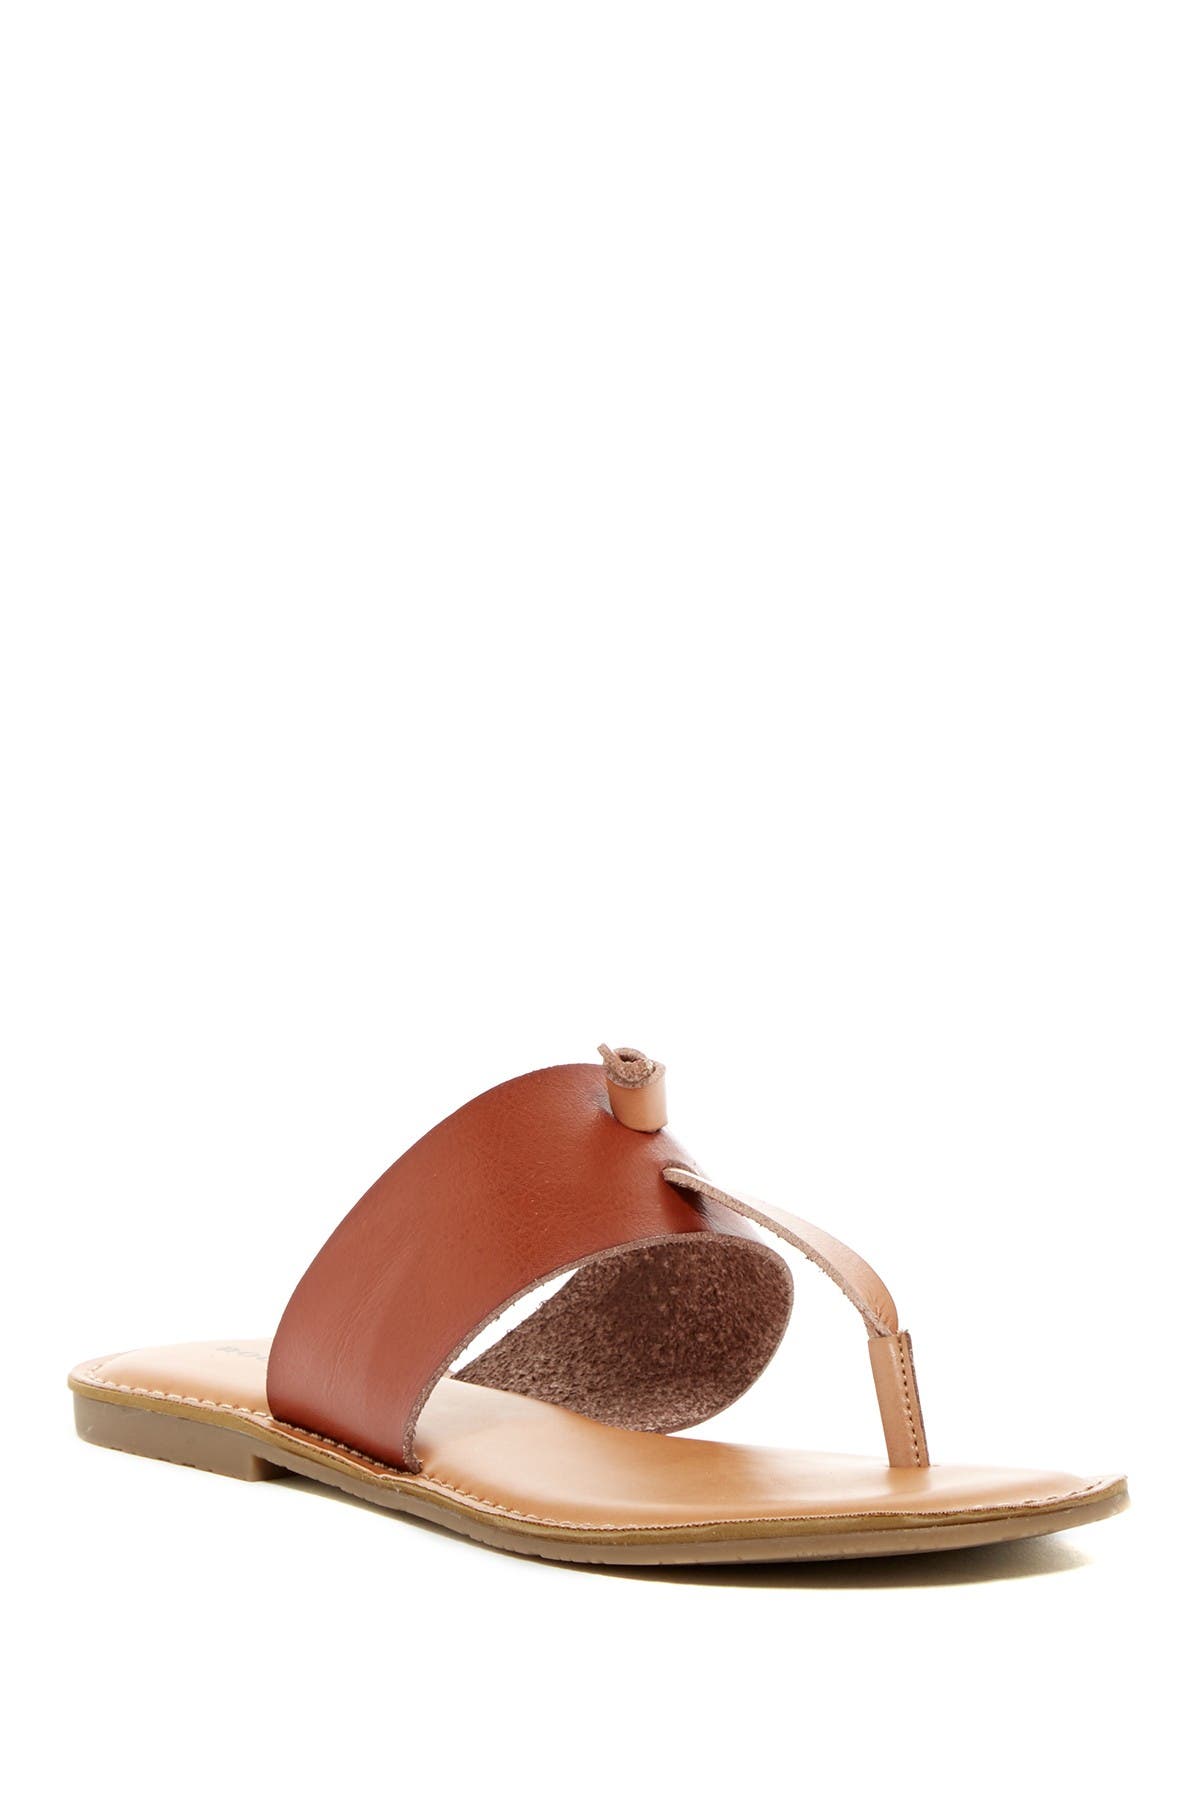 rock and candy blaney sandal